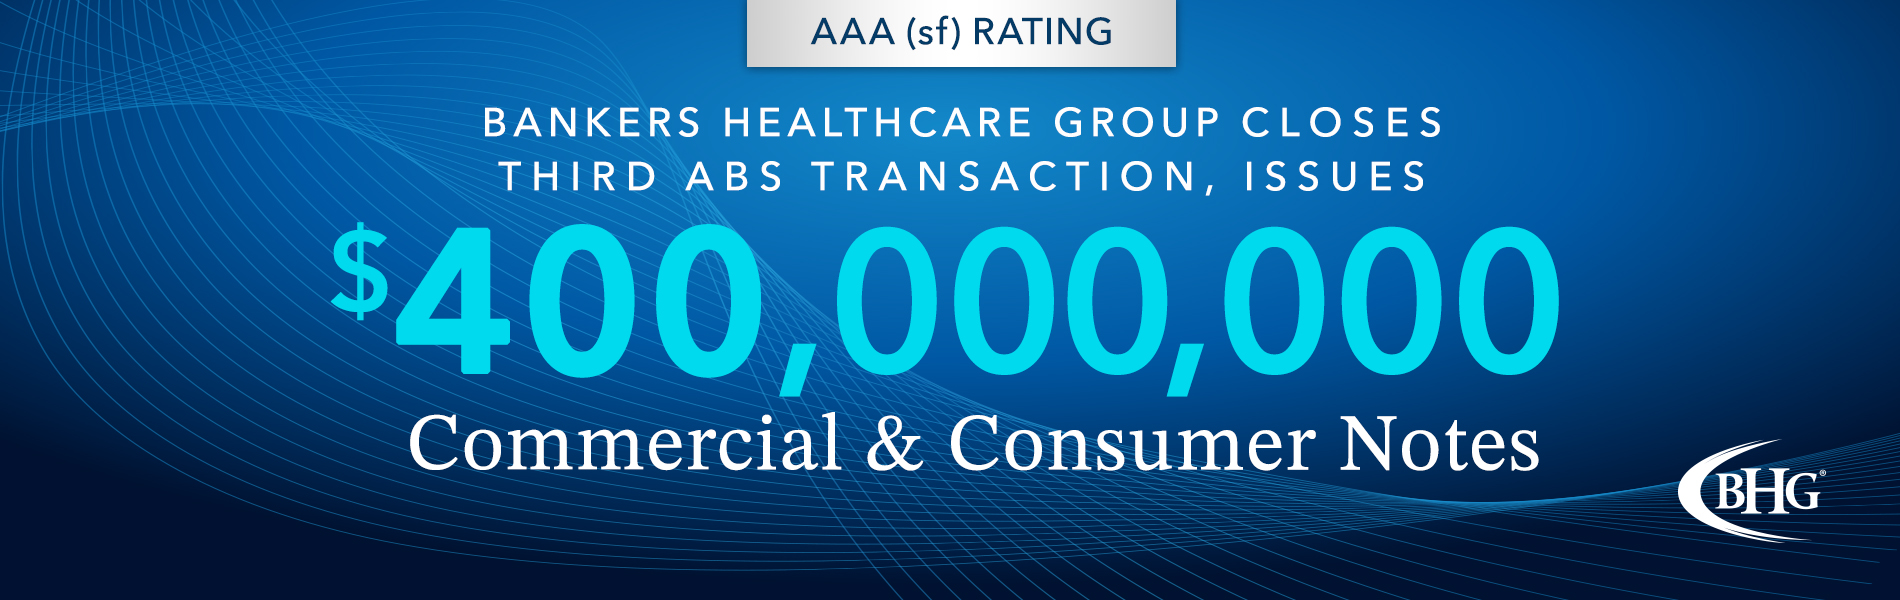 Bankers Healthcare Group Closes Third ABS Transaction